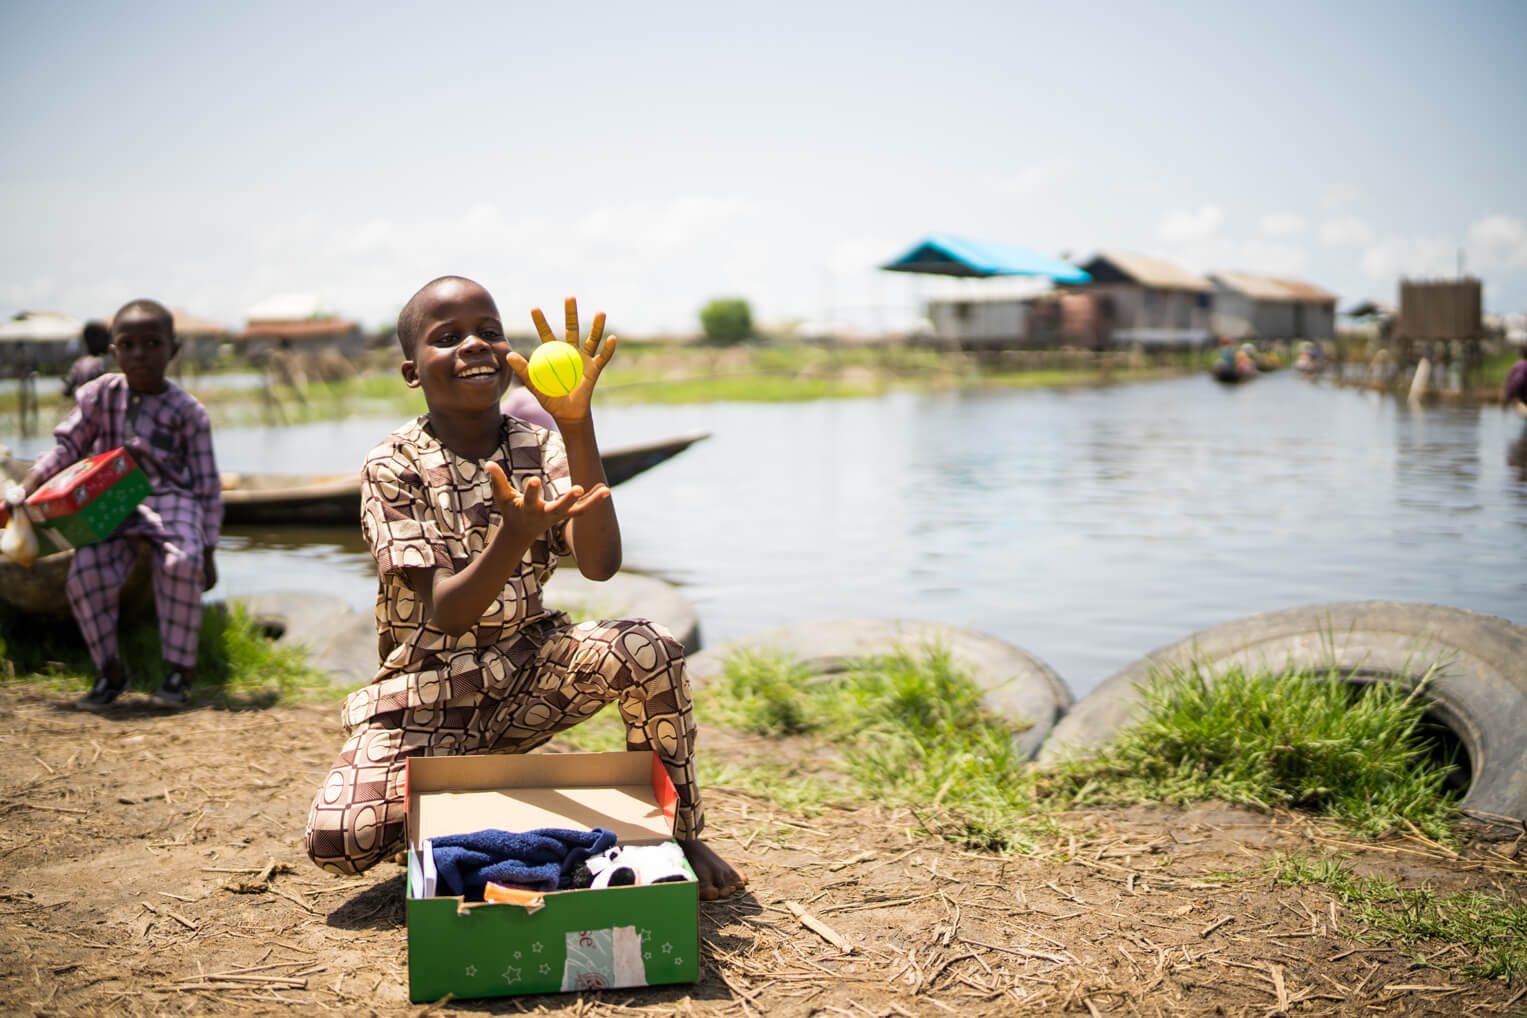 A boy enjoys a new item that he received in his shoebox gift.